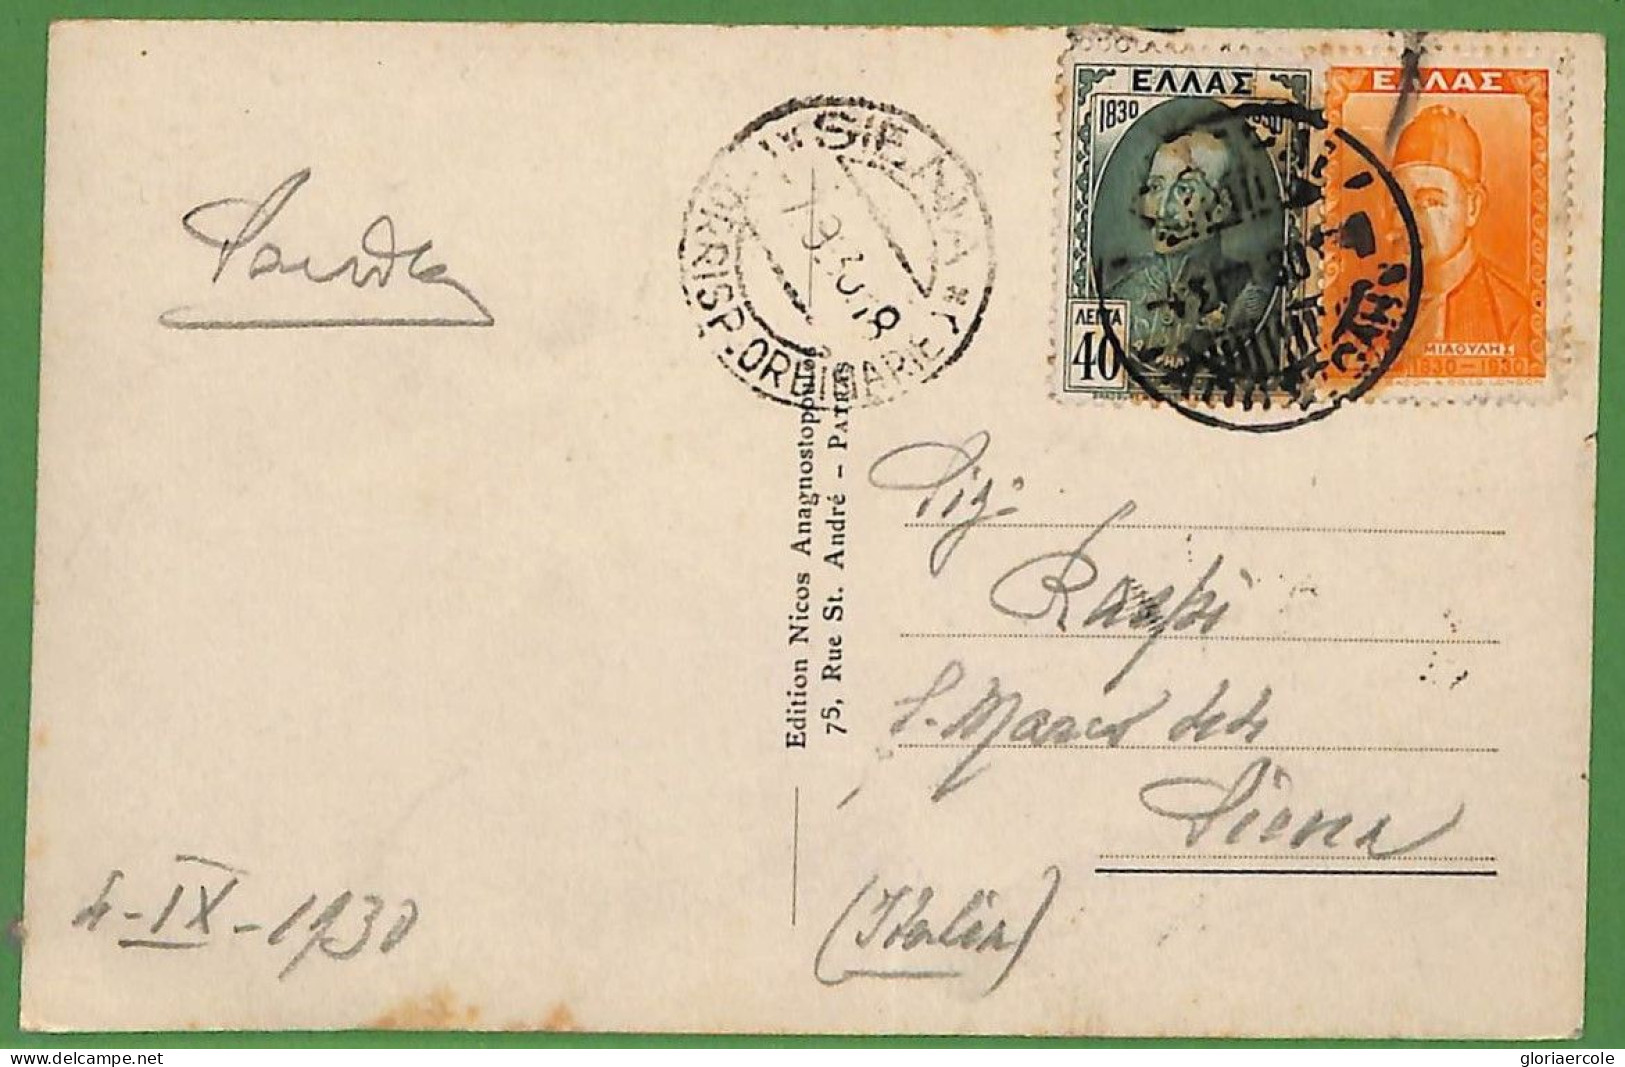 Ad0910 - GREECE - Postal History -  POSTCARD To ITALY 1930 - Covers & Documents